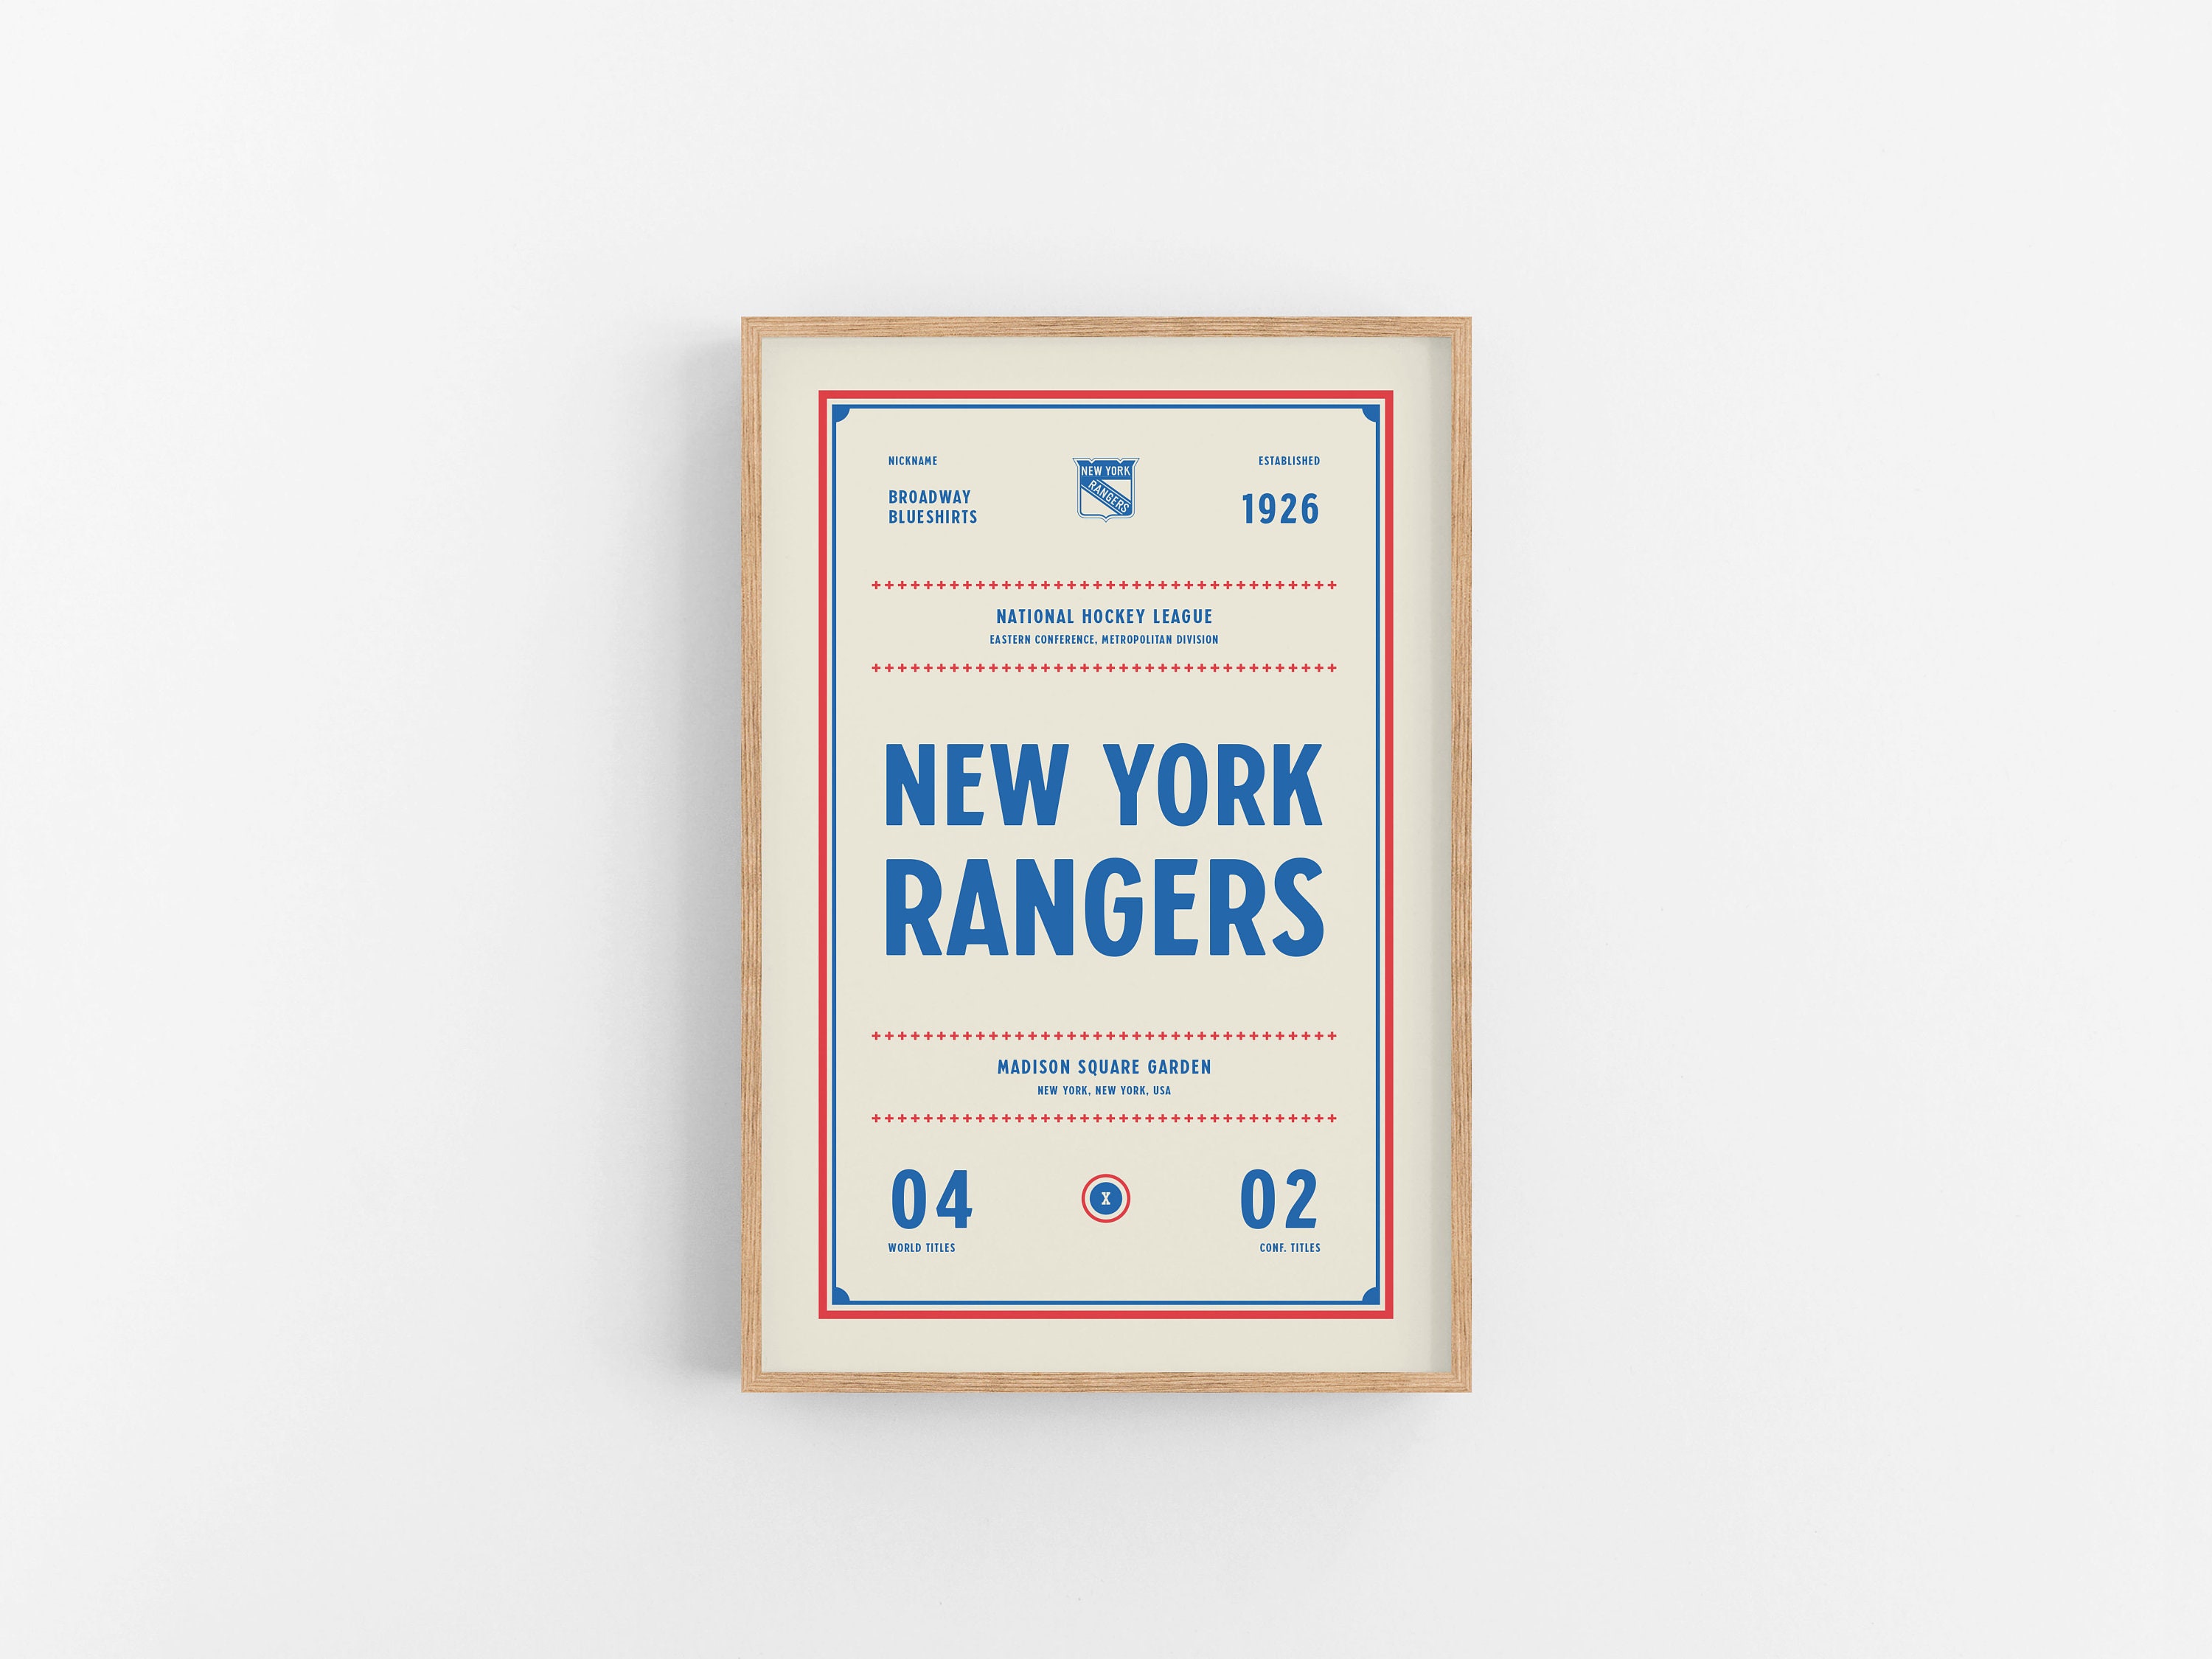 Made this cool iPhone wallpaper for everyone. Taking other NYR